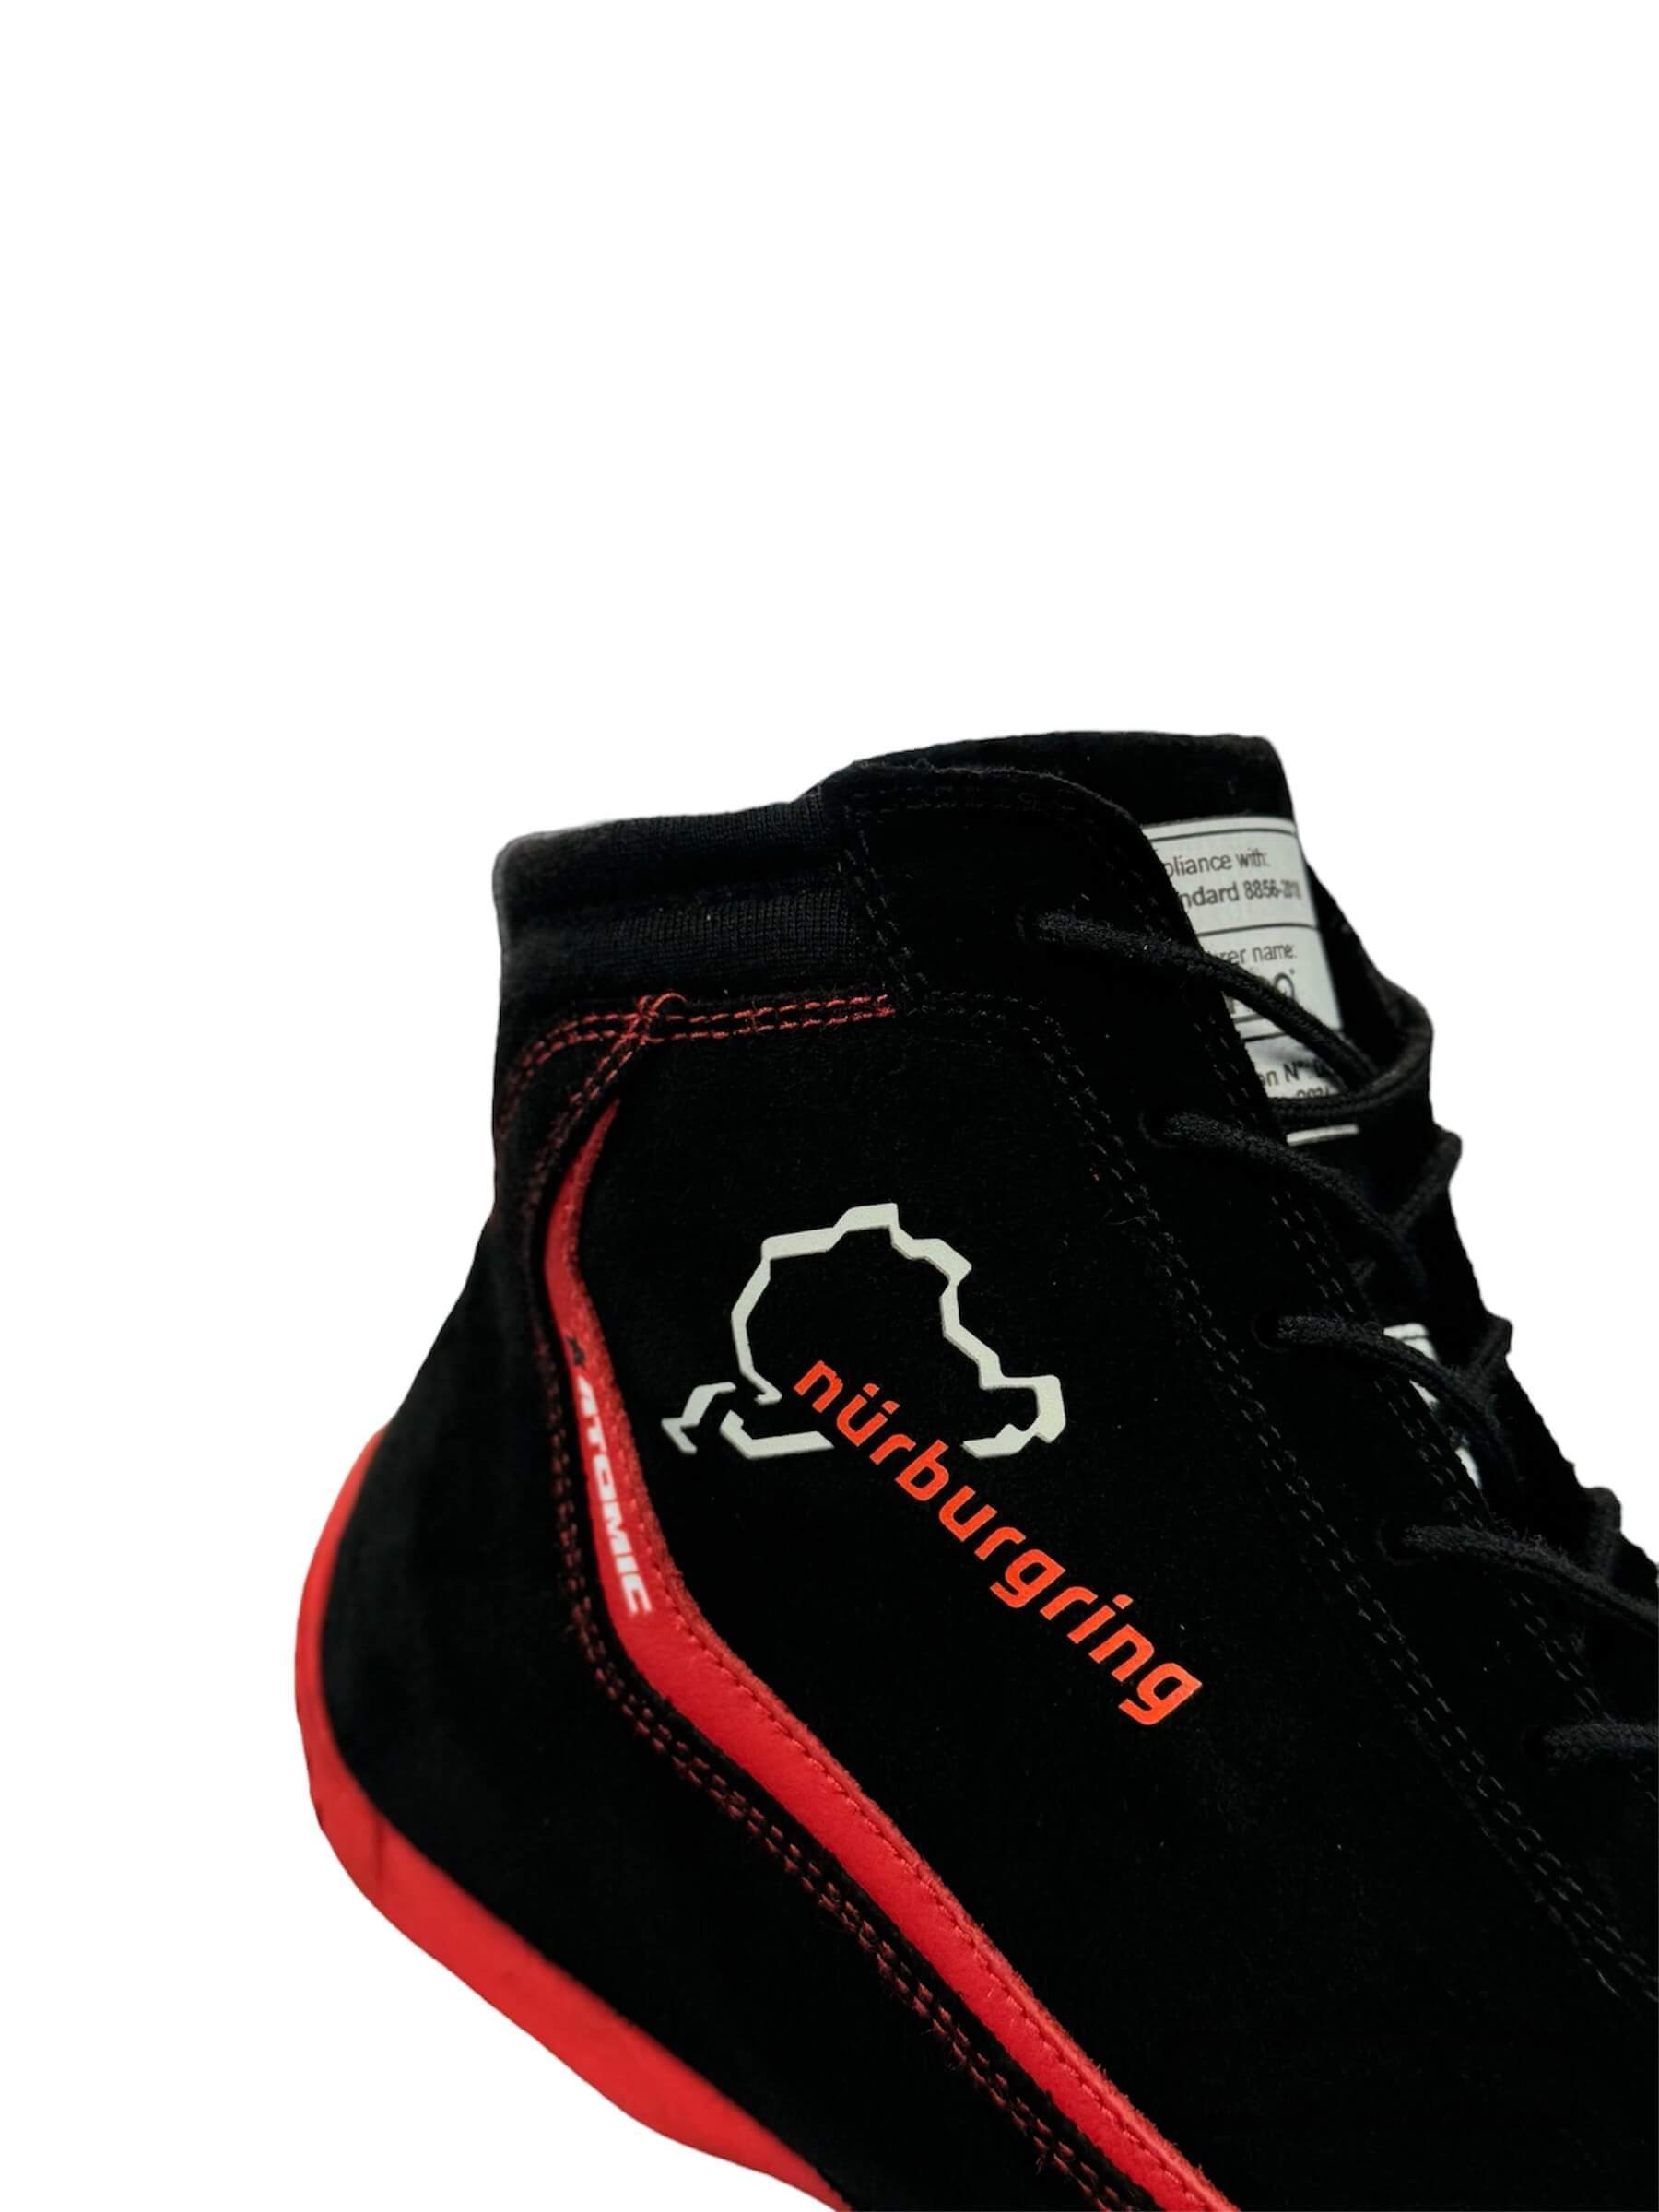 SPARCO 001295SP_NBR42 Shoes Slalom Nurburgring Edition black/red Size 42 Photo-4 